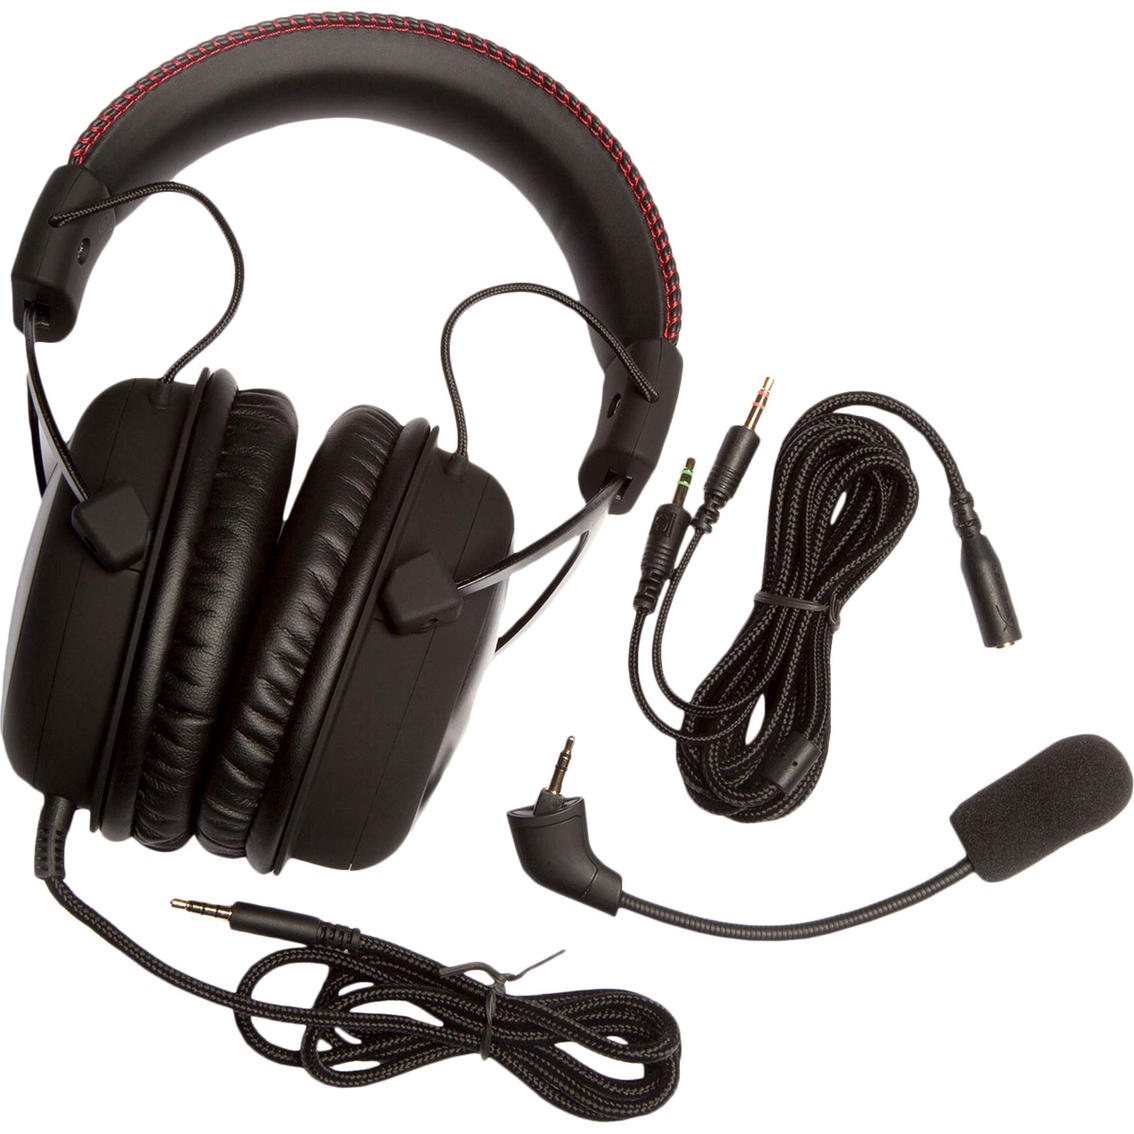 Kingston Hyperx Cloud Core Gaming Headset Ps4 Accessories